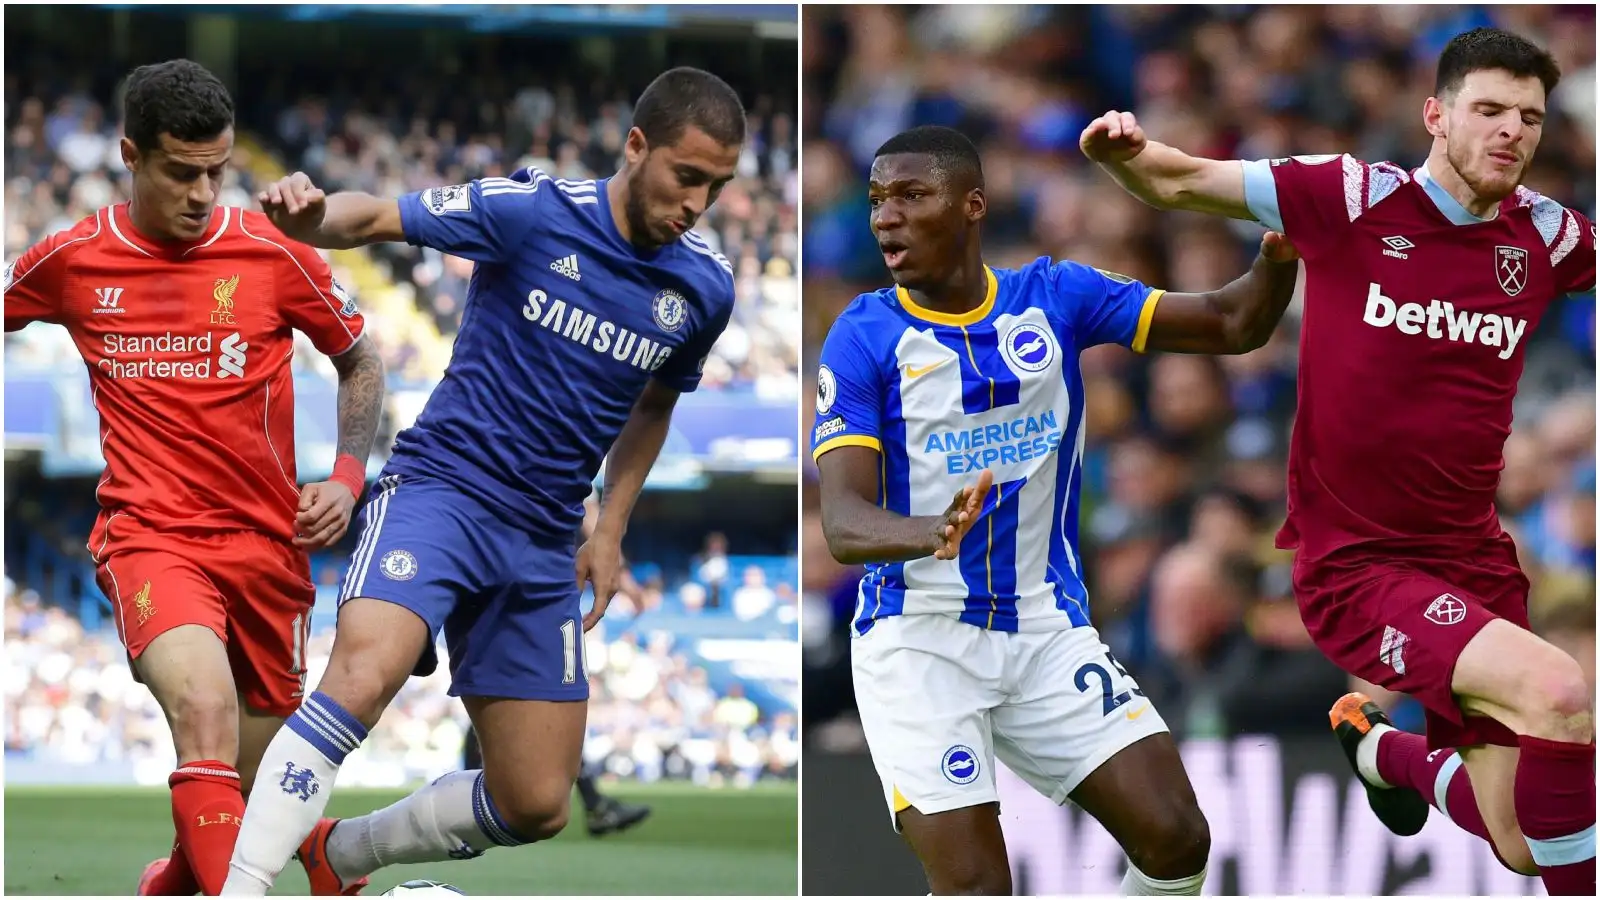 Seven Premier League legends who could return in January transfers like  Hazard, Suarez and Balotelli